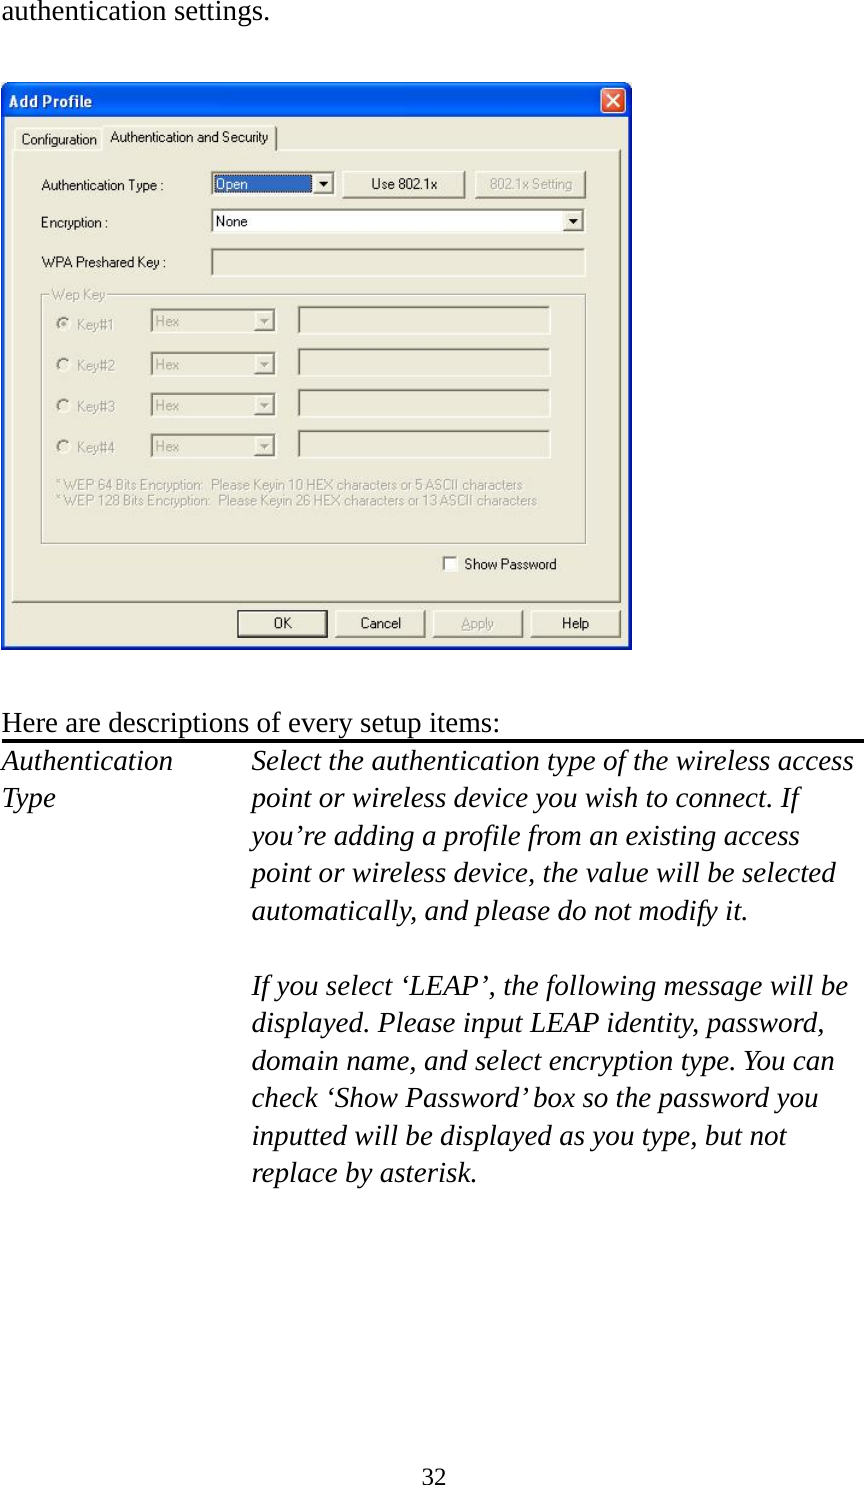  32authentication settings.    Here are descriptions of every setup items: Authentication   Select the authentication type of the wireless access Type  point or wireless device you wish to connect. If you’re adding a profile from an existing access point or wireless device, the value will be selected automatically, and please do not modify it.  If you select ‘LEAP’, the following message will be displayed. Please input LEAP identity, password, domain name, and select encryption type. You can check ‘Show Password’ box so the password you inputted will be displayed as you type, but not replace by asterisk.   